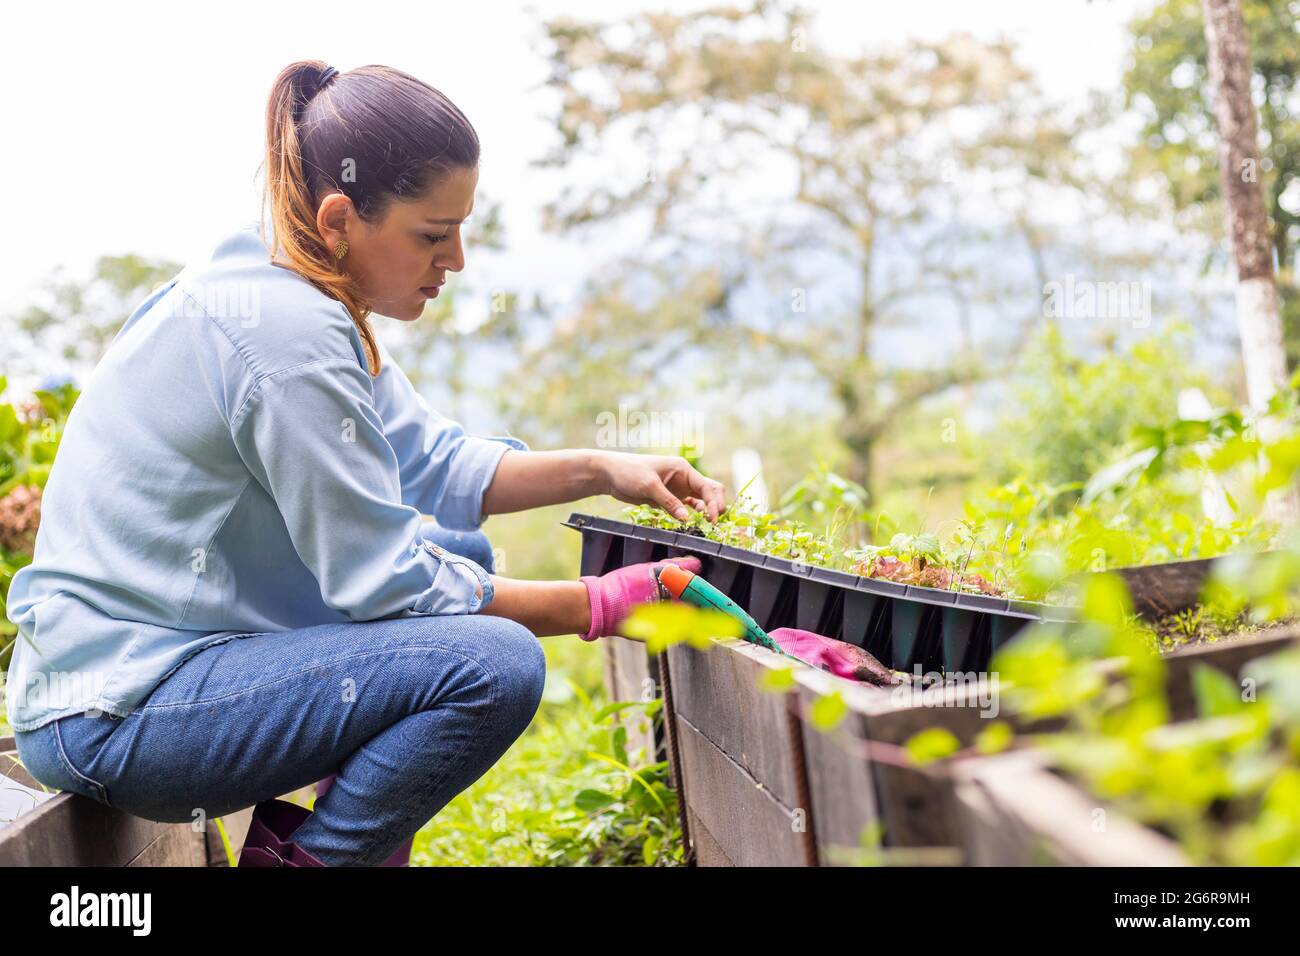 Woman removing seedling from germination tray for transplanting Stock Photo